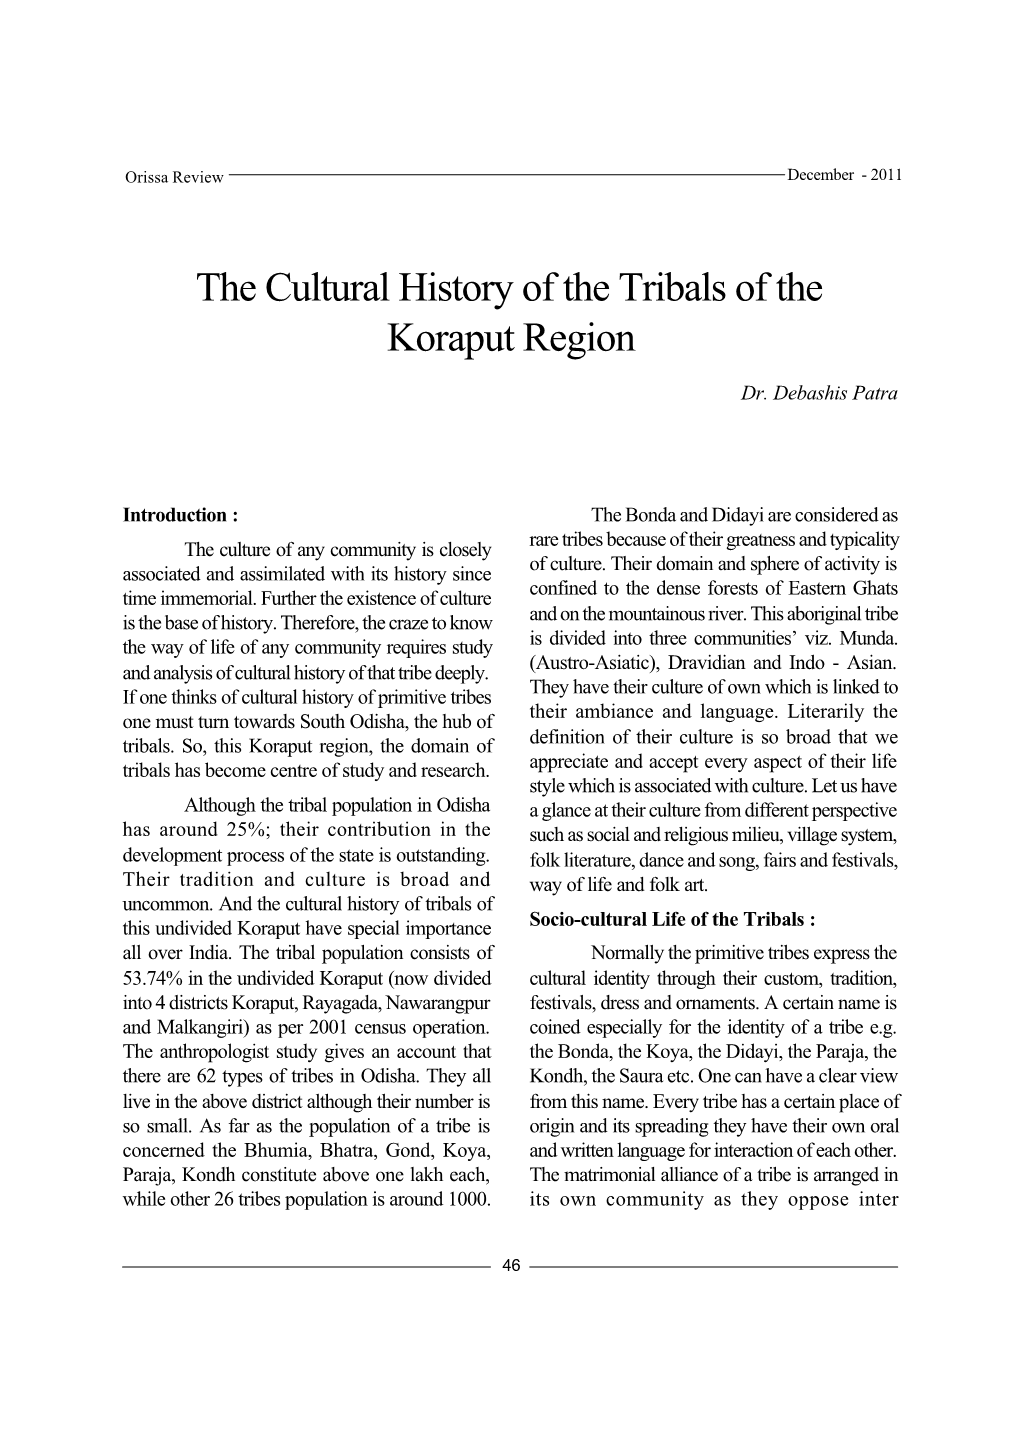 The Cultural History of the Tribals of the Koraput Region